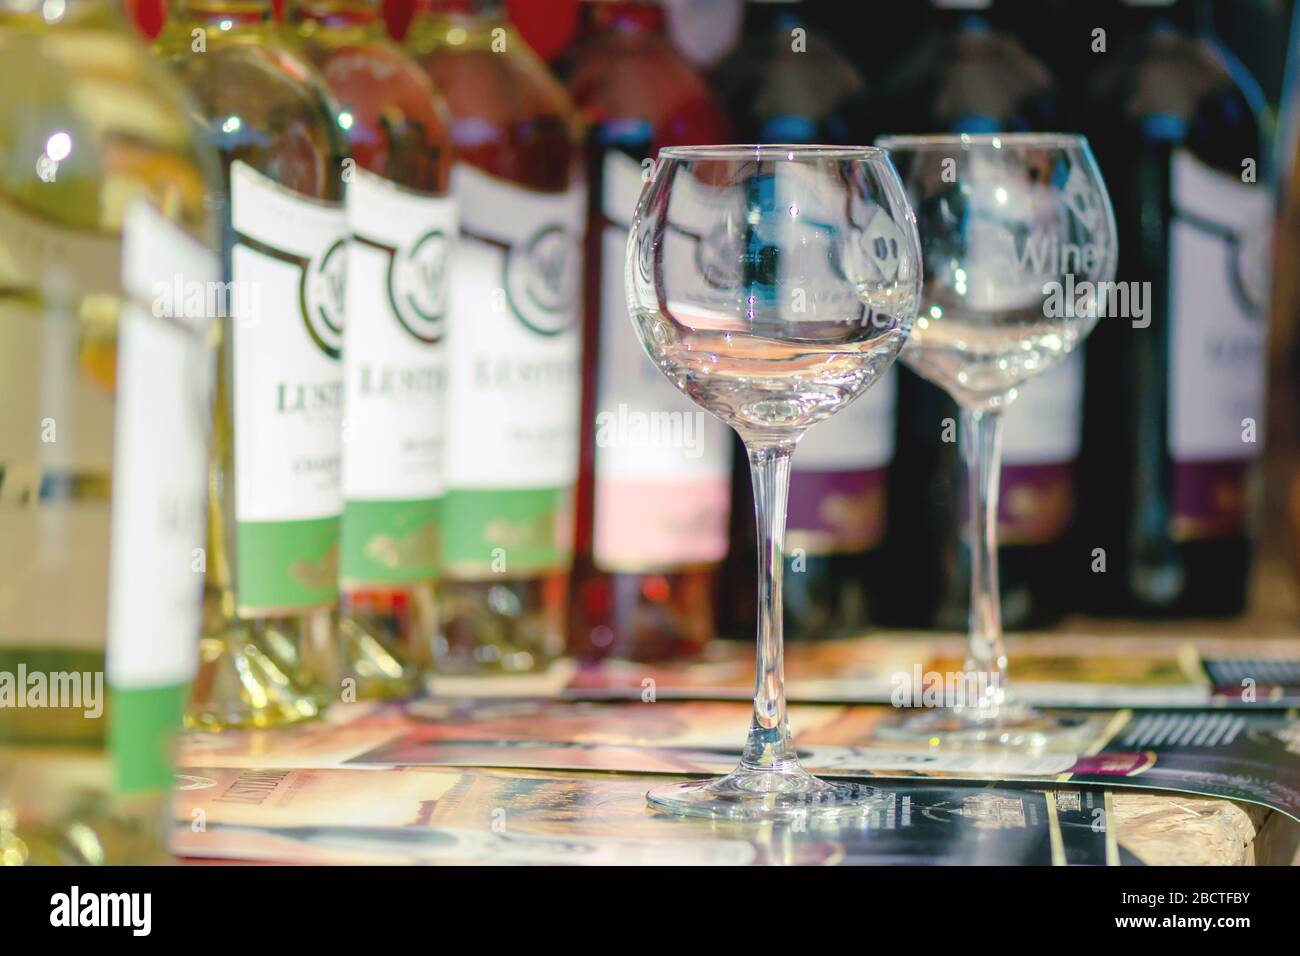 https://c8.alamy.com/comp/2BCTFBY/sumy-ukraine-august-25-2019-the-second-wine-festival-in-sumy-2-wine-glasses-stand-on-a-table-next-to-bottles-of-wine-sunny-2BCTFBY.jpg